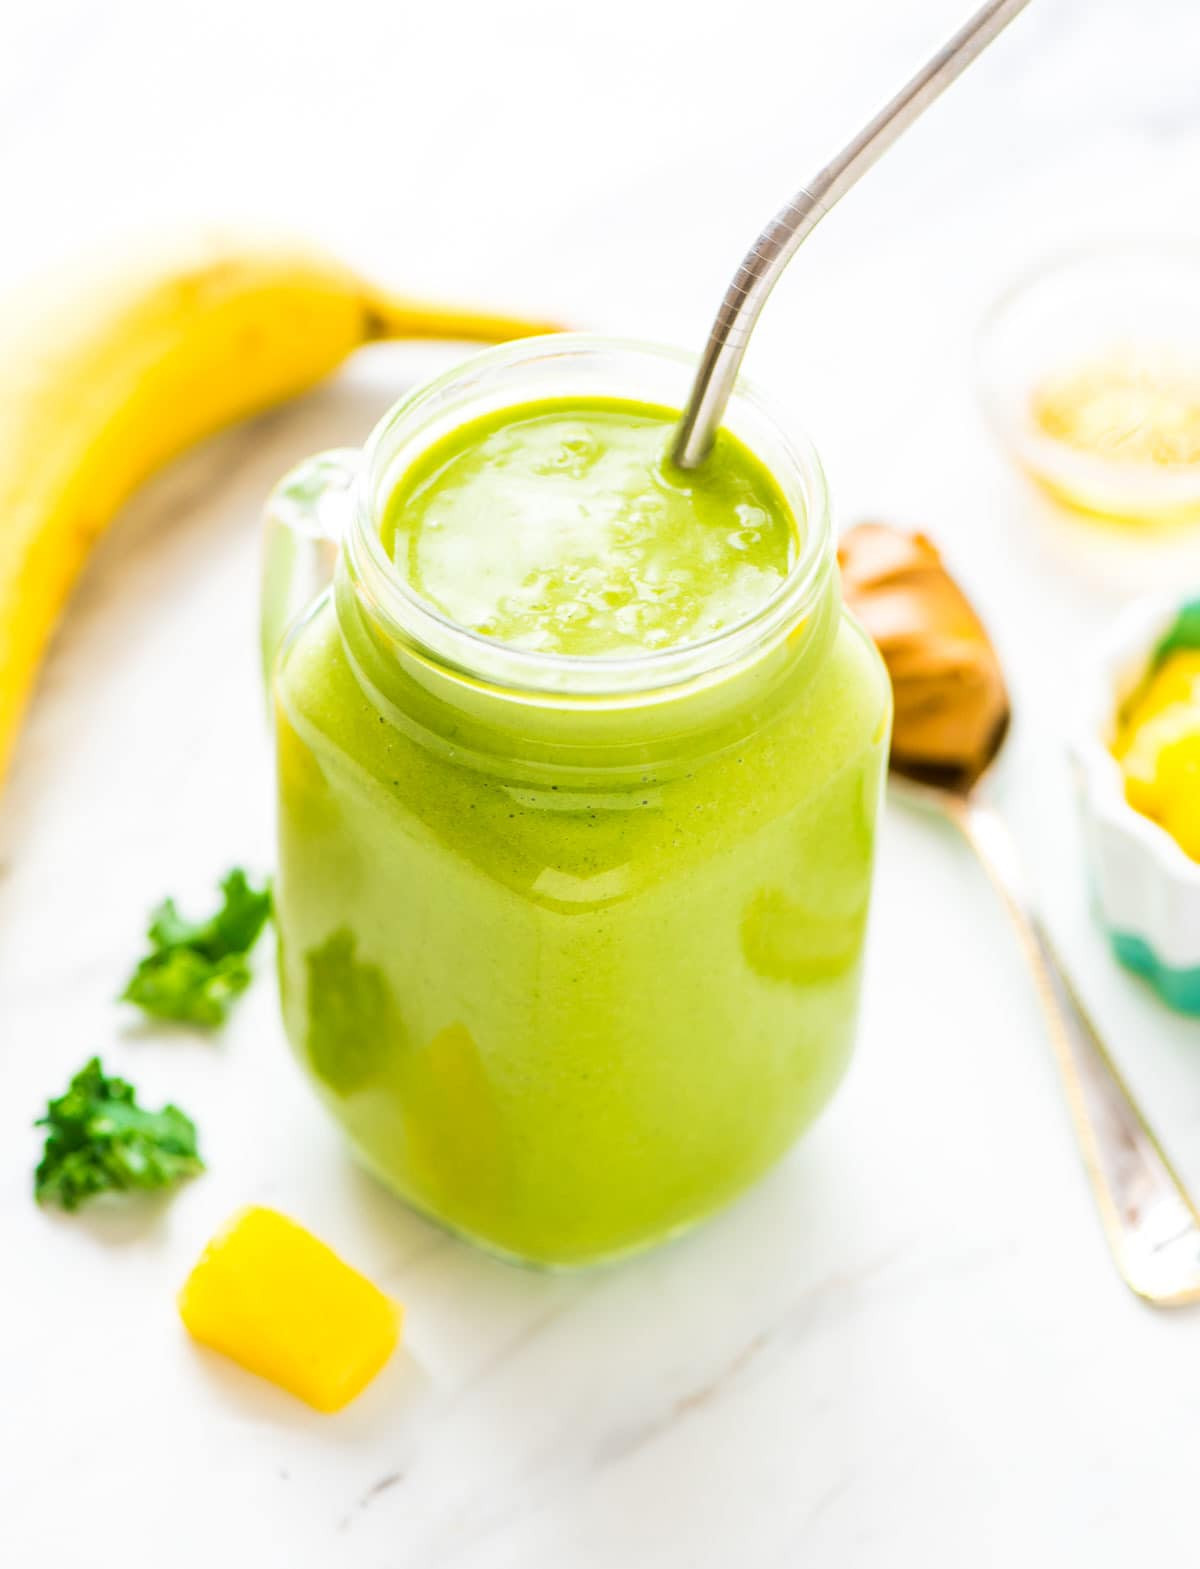 Pineapple Smoothie Recipes
 Kale Pineapple Healthy Breakfast Smoothie